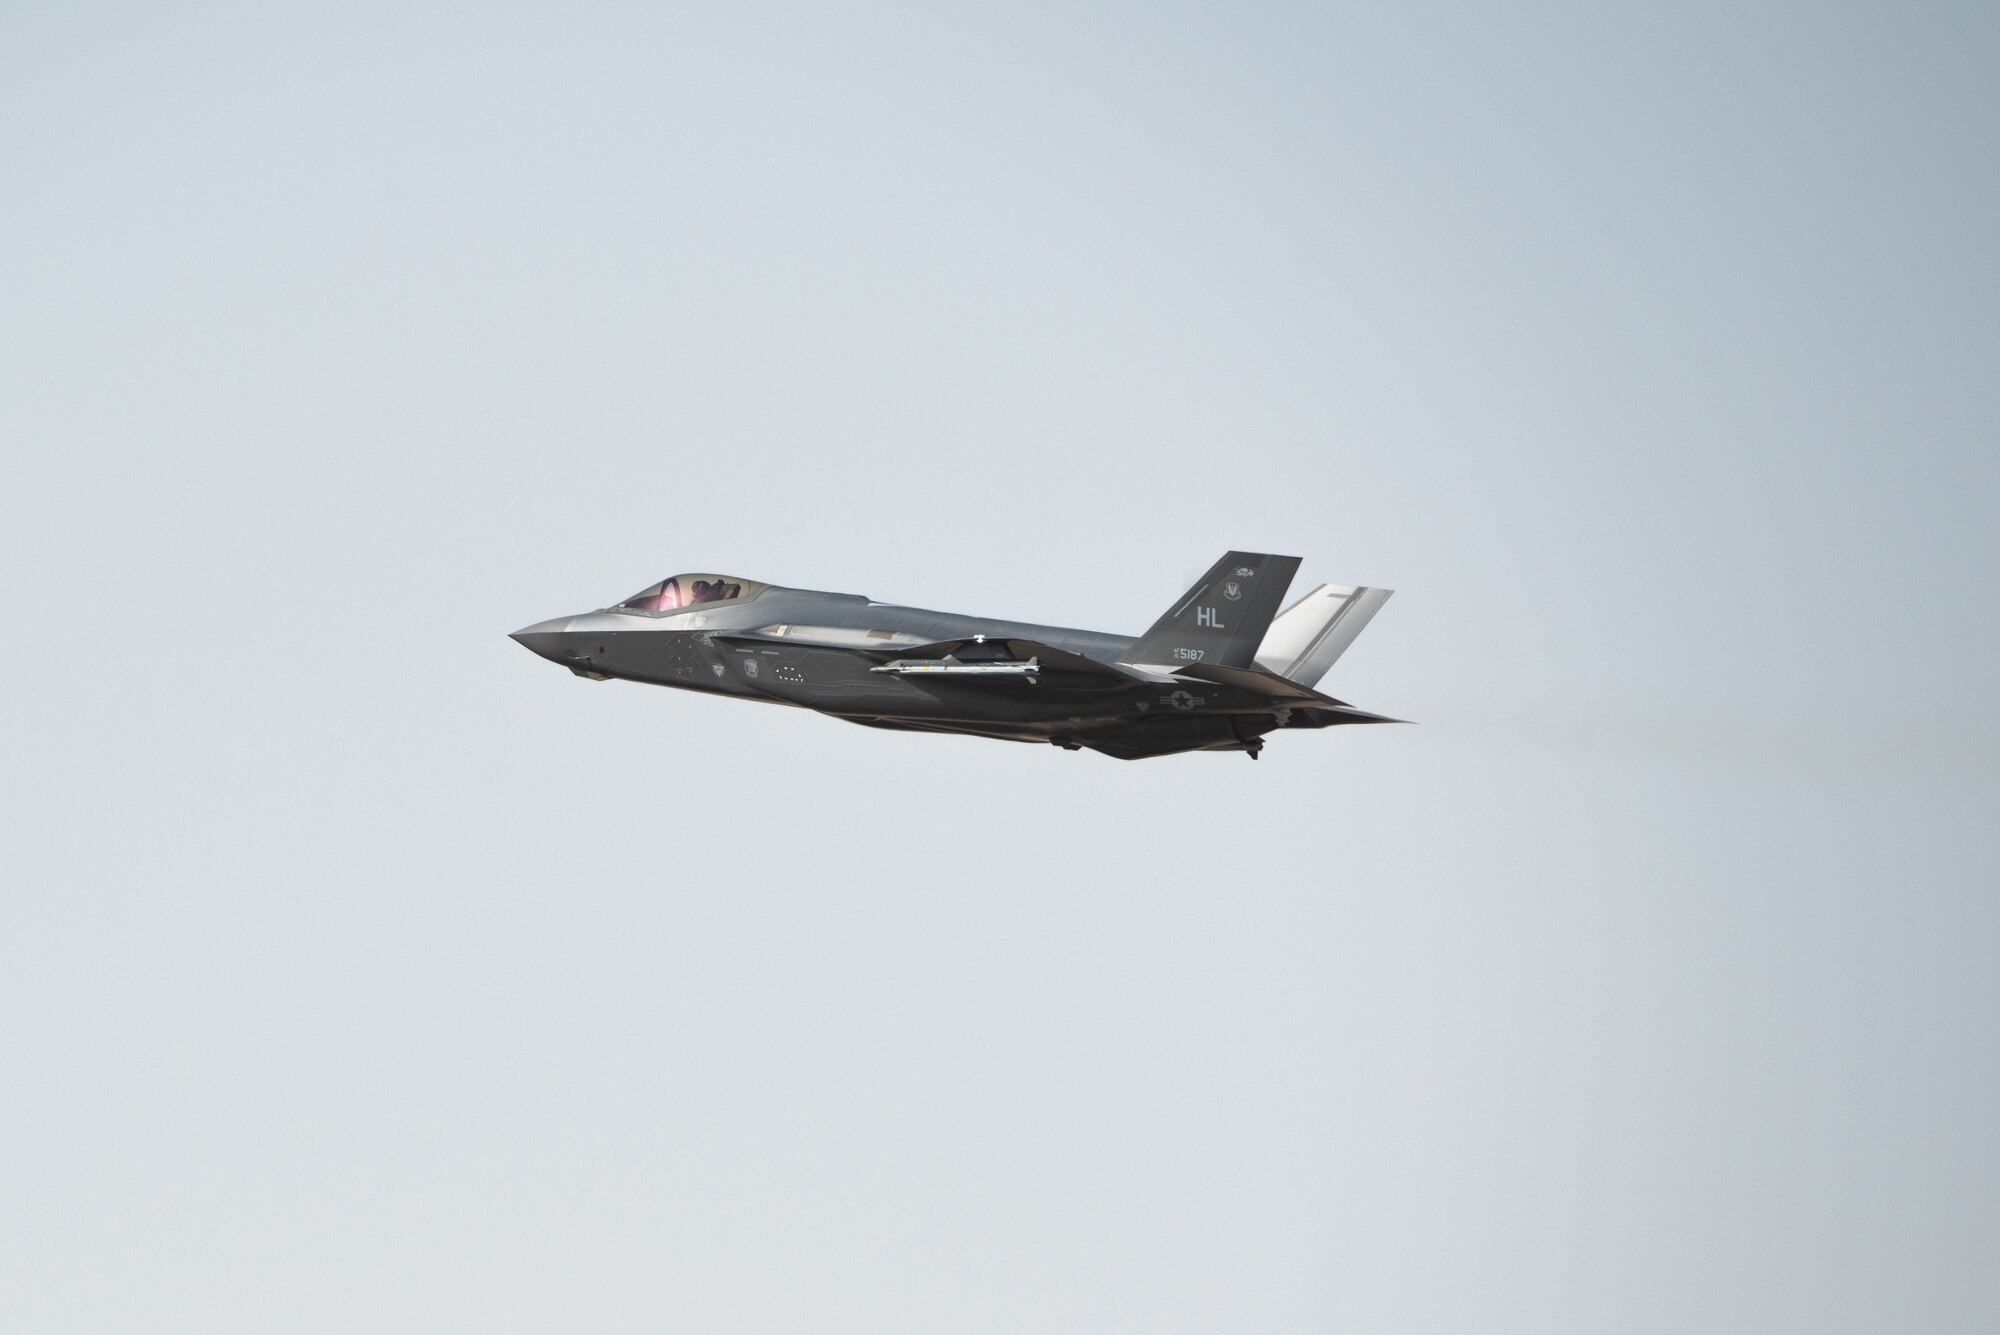 An F-35A Lightning II takes off from Al Dhafra Air Base, United Arab Emirates, June 6, 2019.